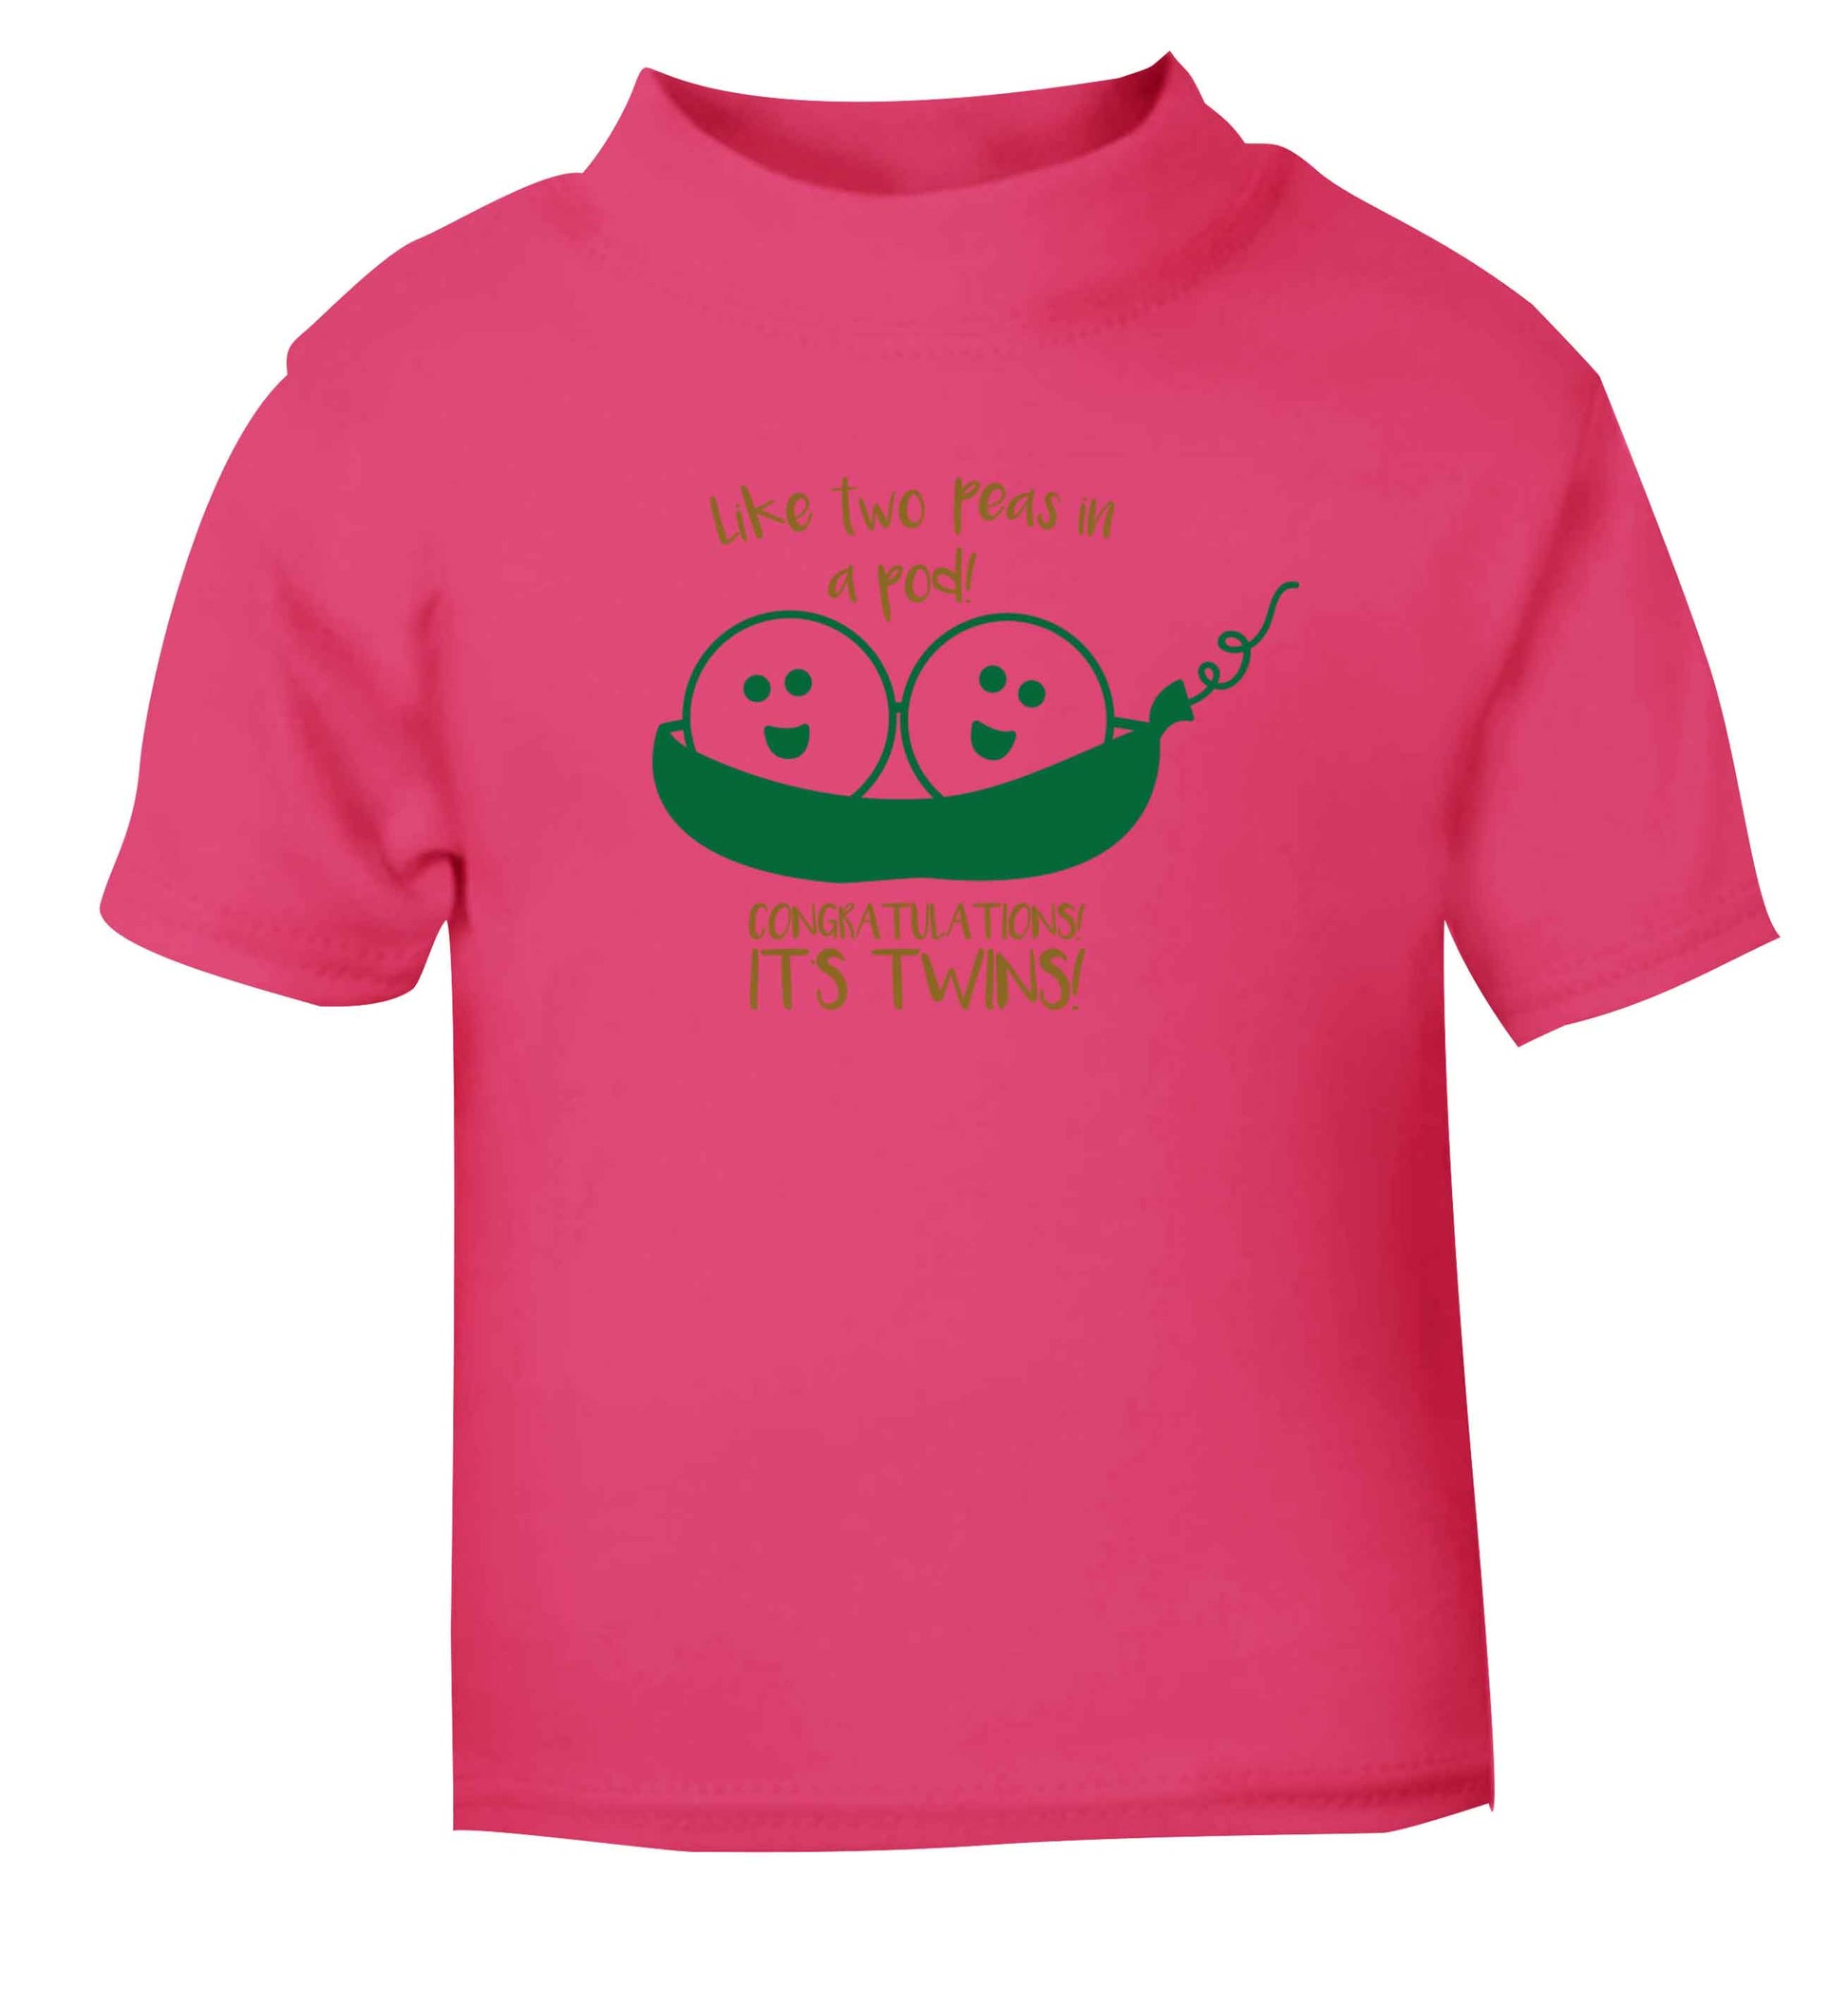 Like two peas in a pod! Congratulations it's twins! pink baby toddler Tshirt 2 Years